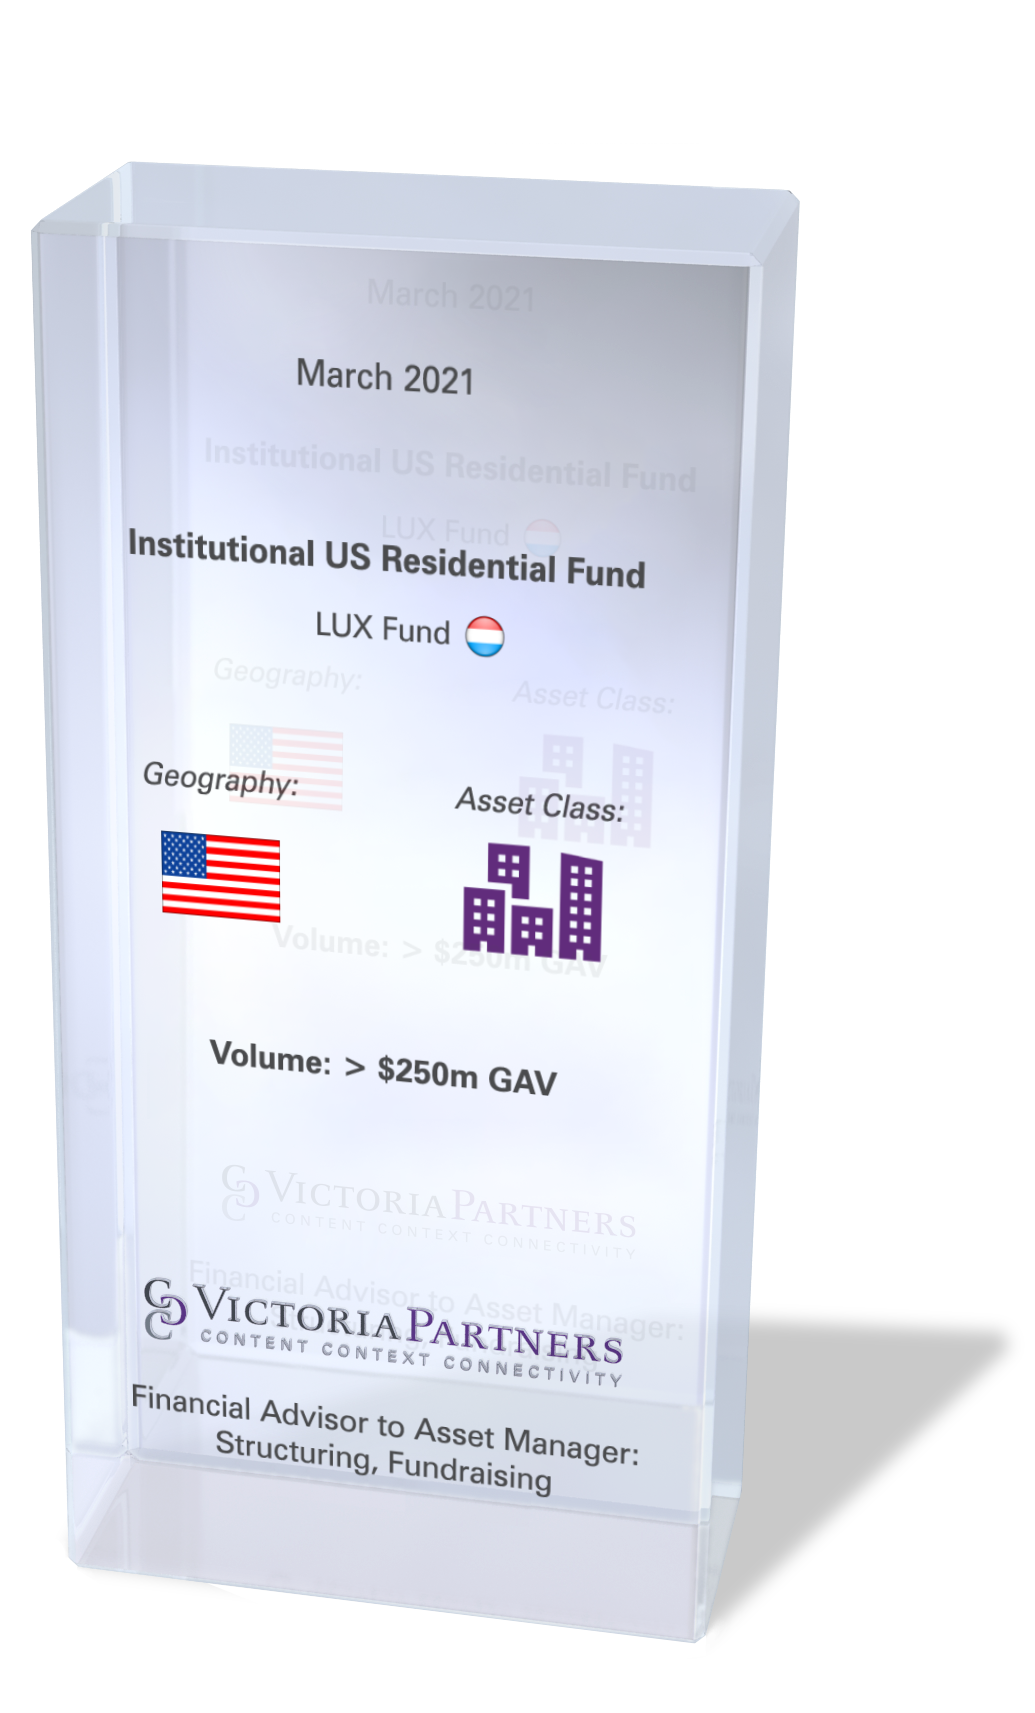 VICTORIAPARTNERS - Financial Advisor to Asset Manager: Structuring, Fundraising in the US - March 2021